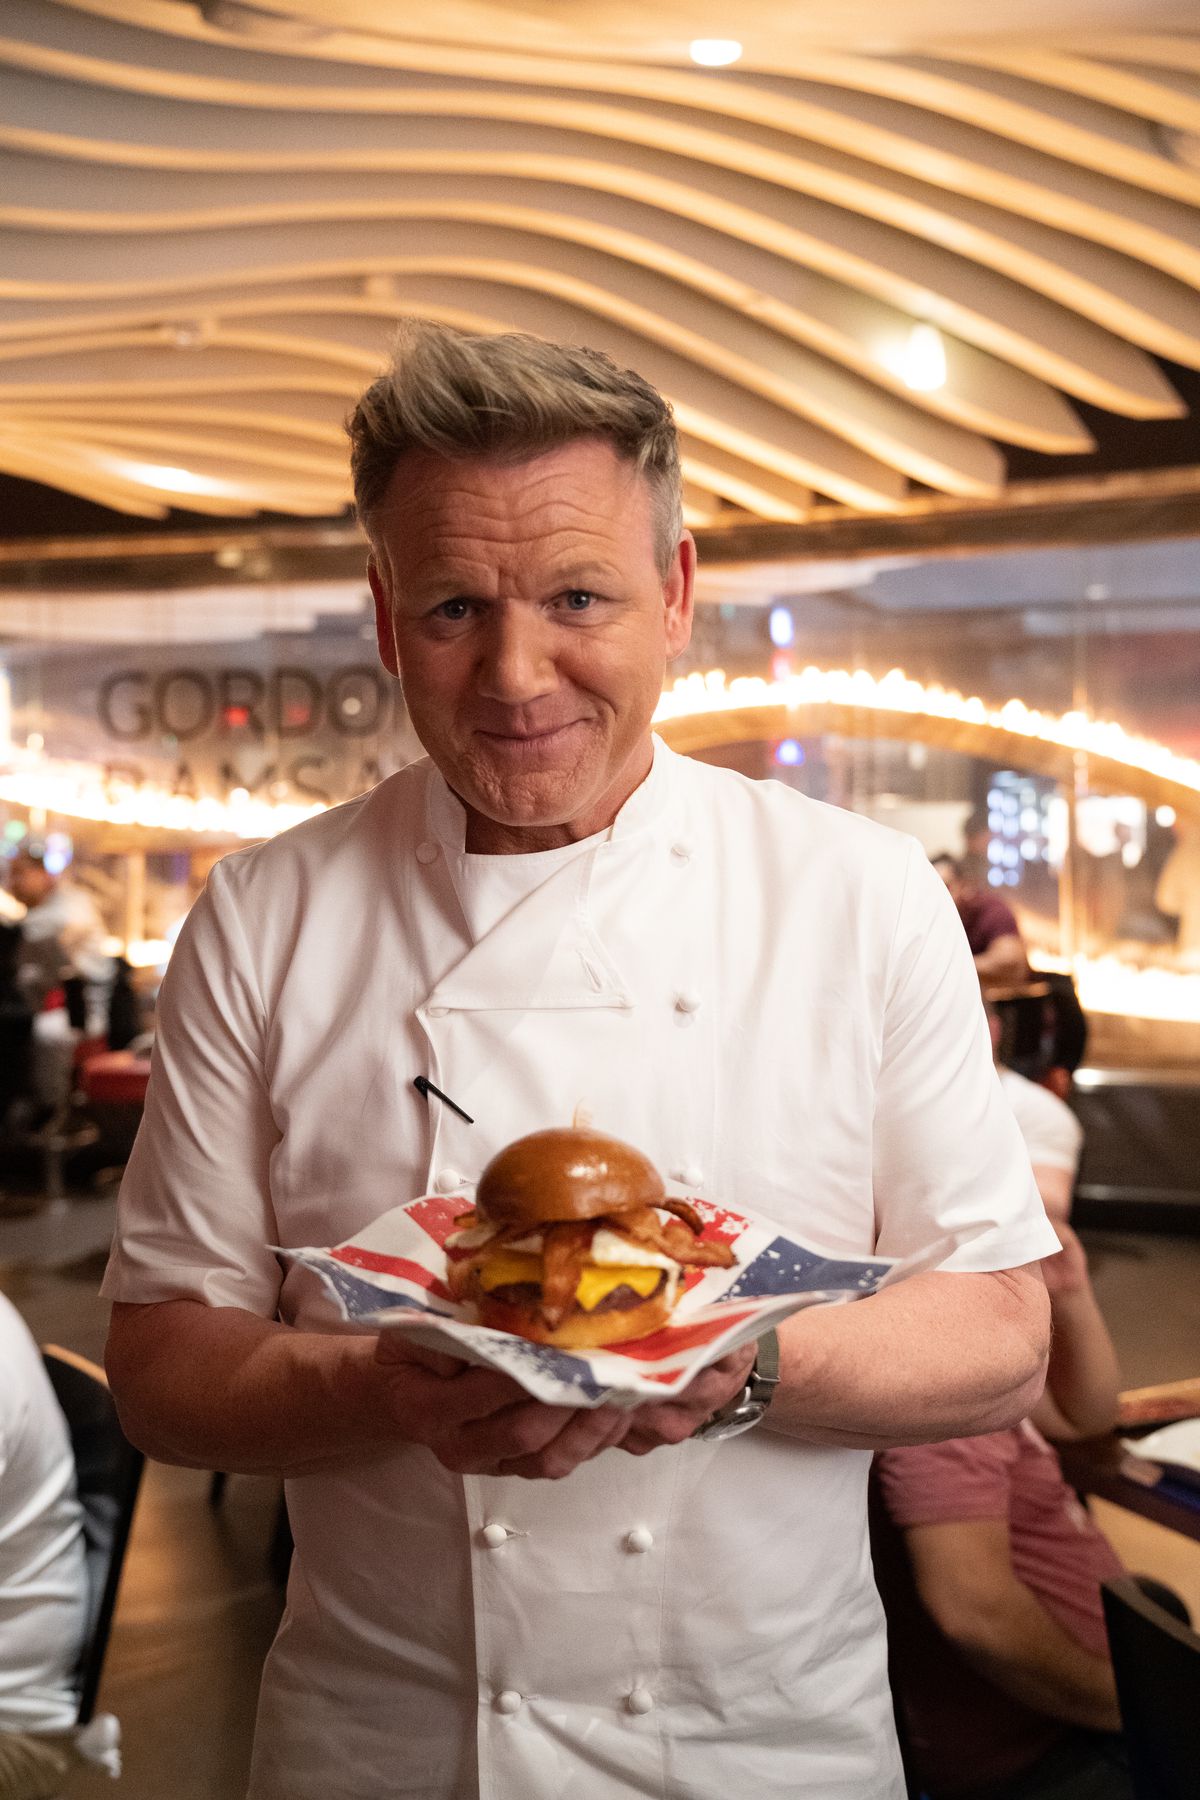 Celebrity chef Gordon Ramsay is serving up burgers and more at his Gordon Ramsay Burger in River North. 